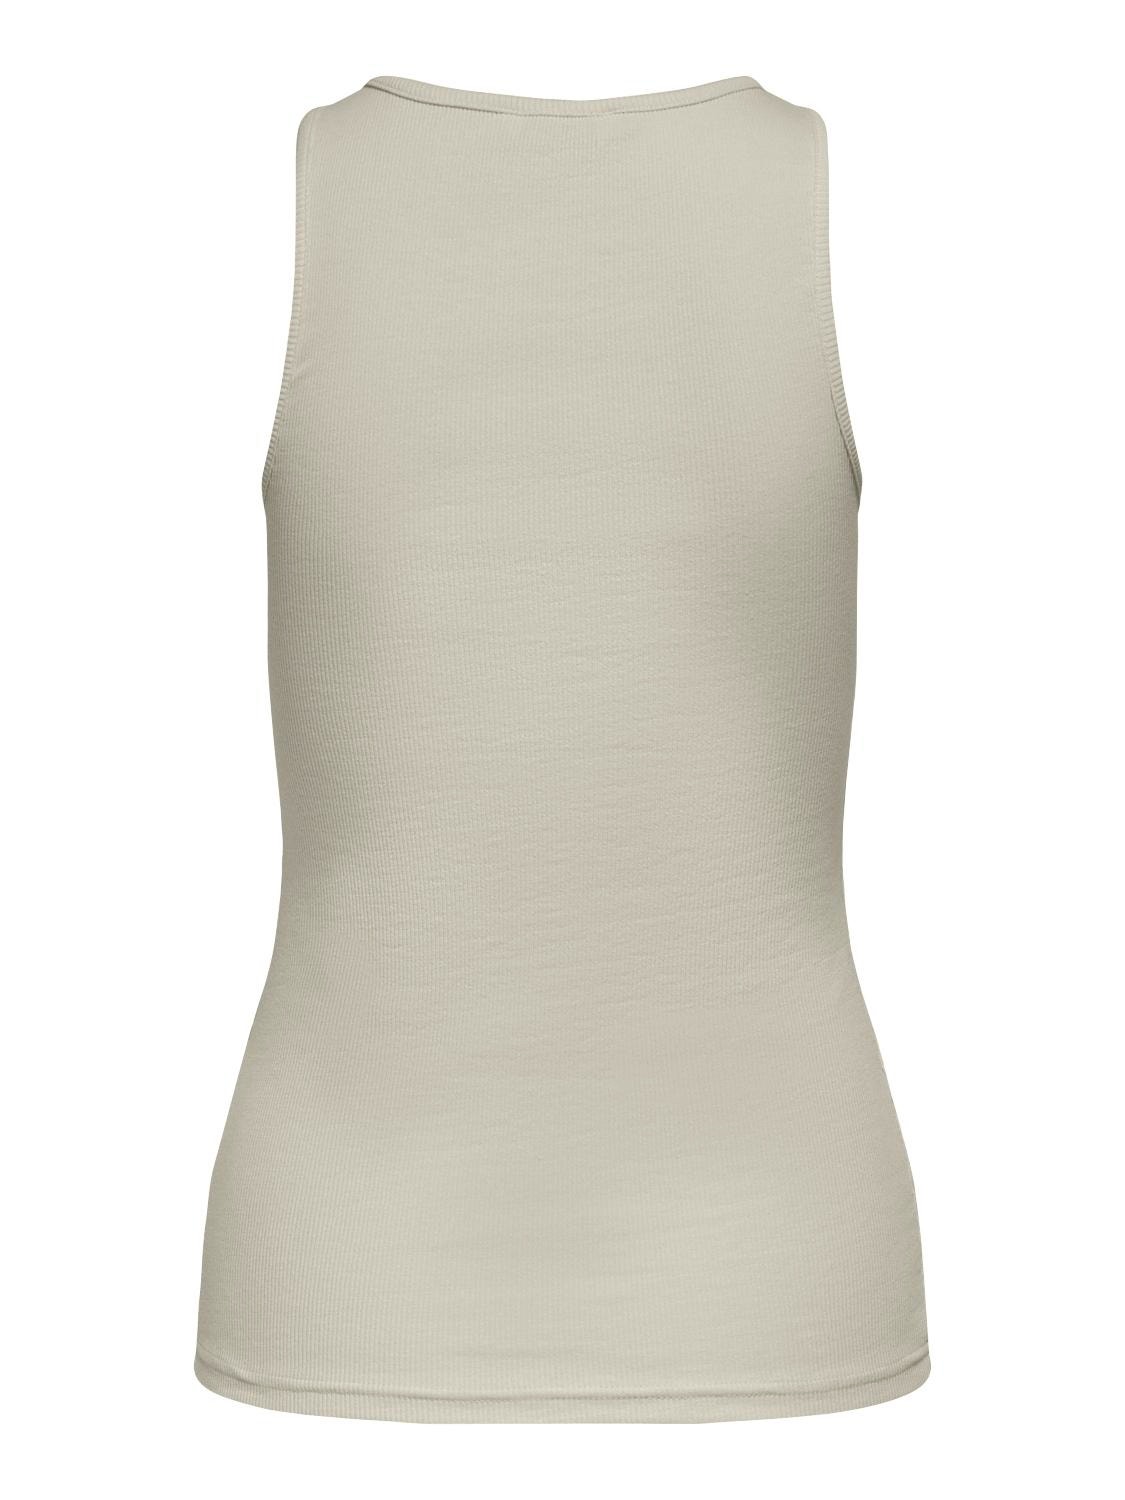 ONLY Regular fit O-hals Tanktop -Pumice Stone - 15234659